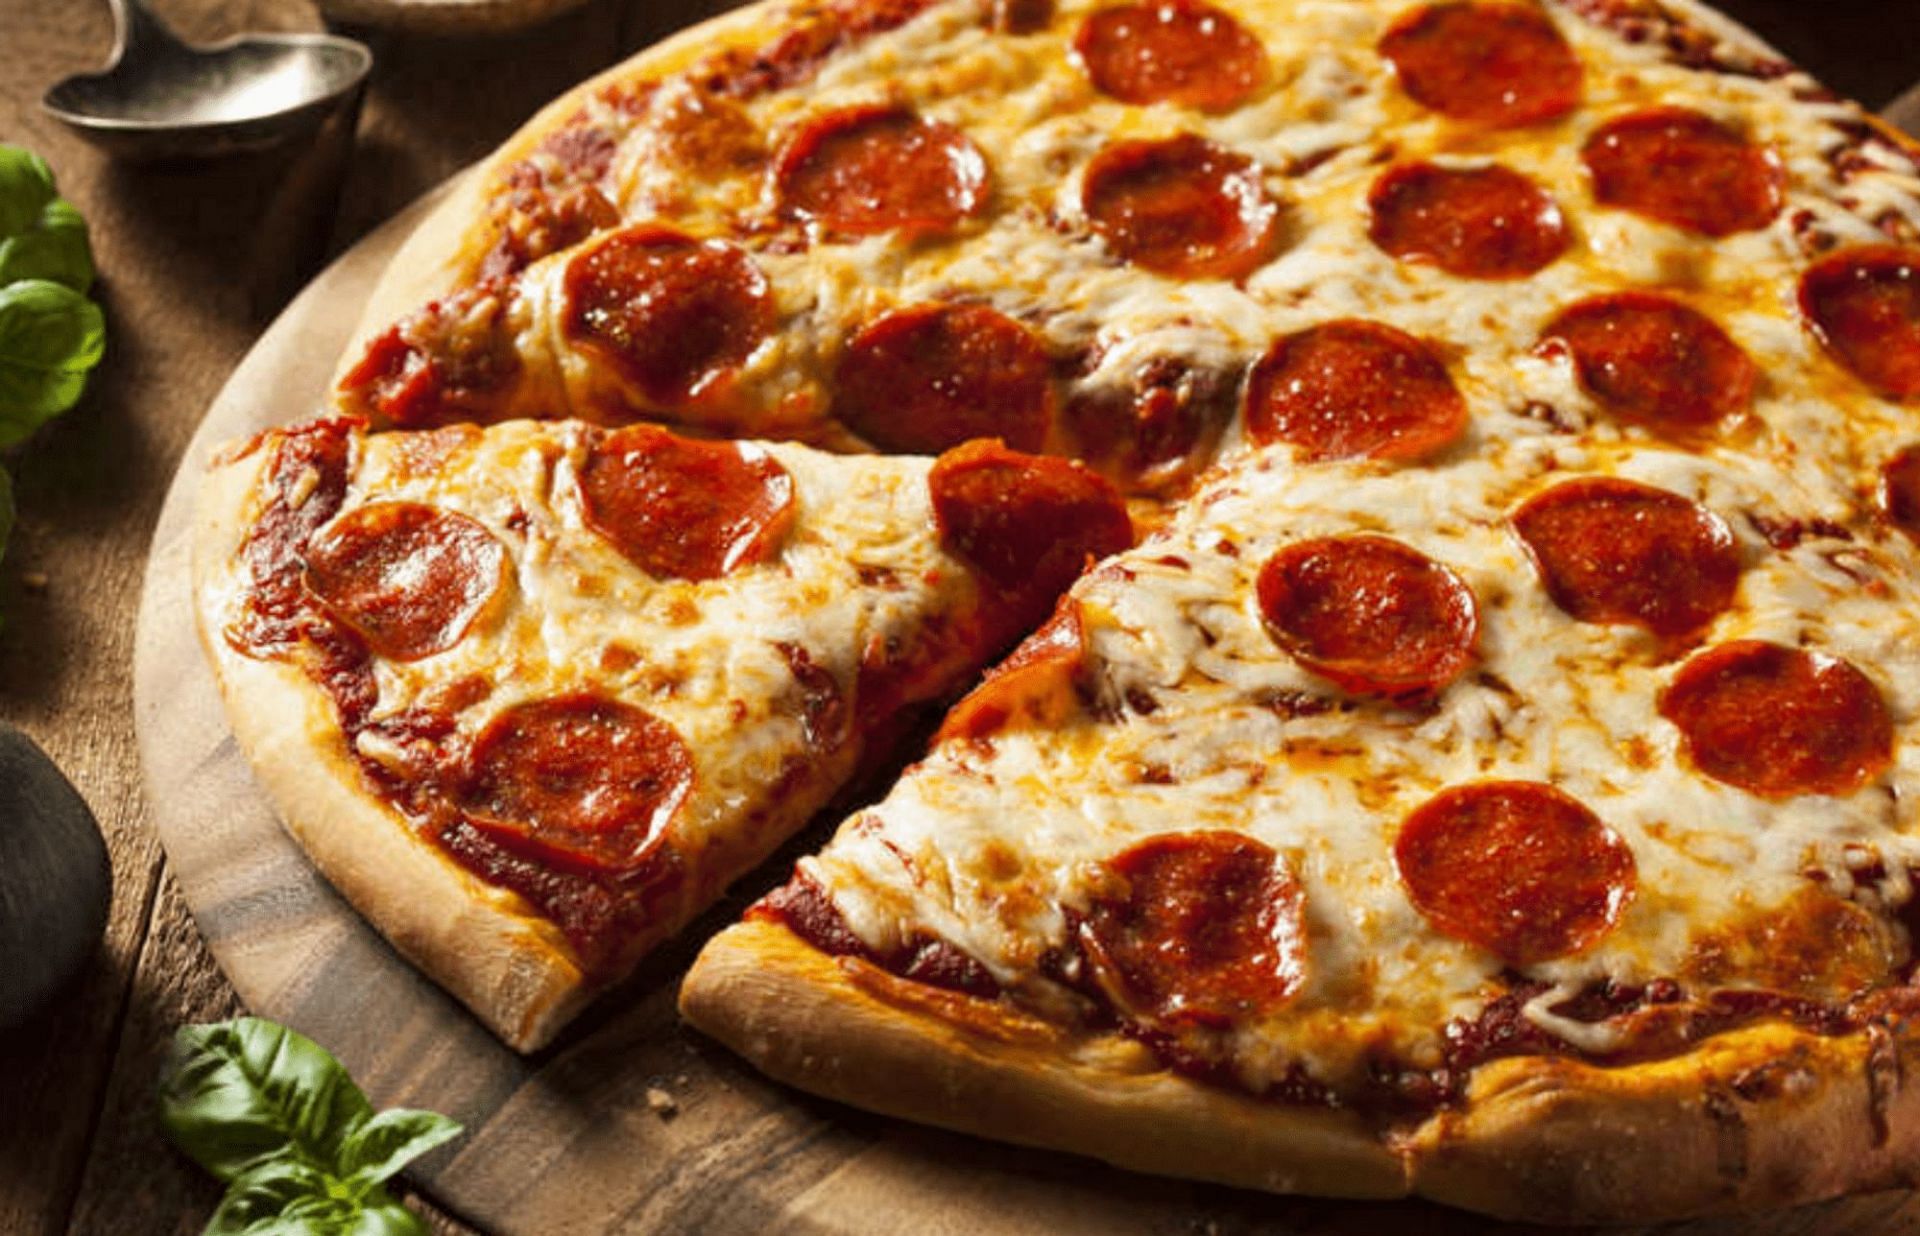 Pepperoni Pizza recall All you need to know as FSIS makes official